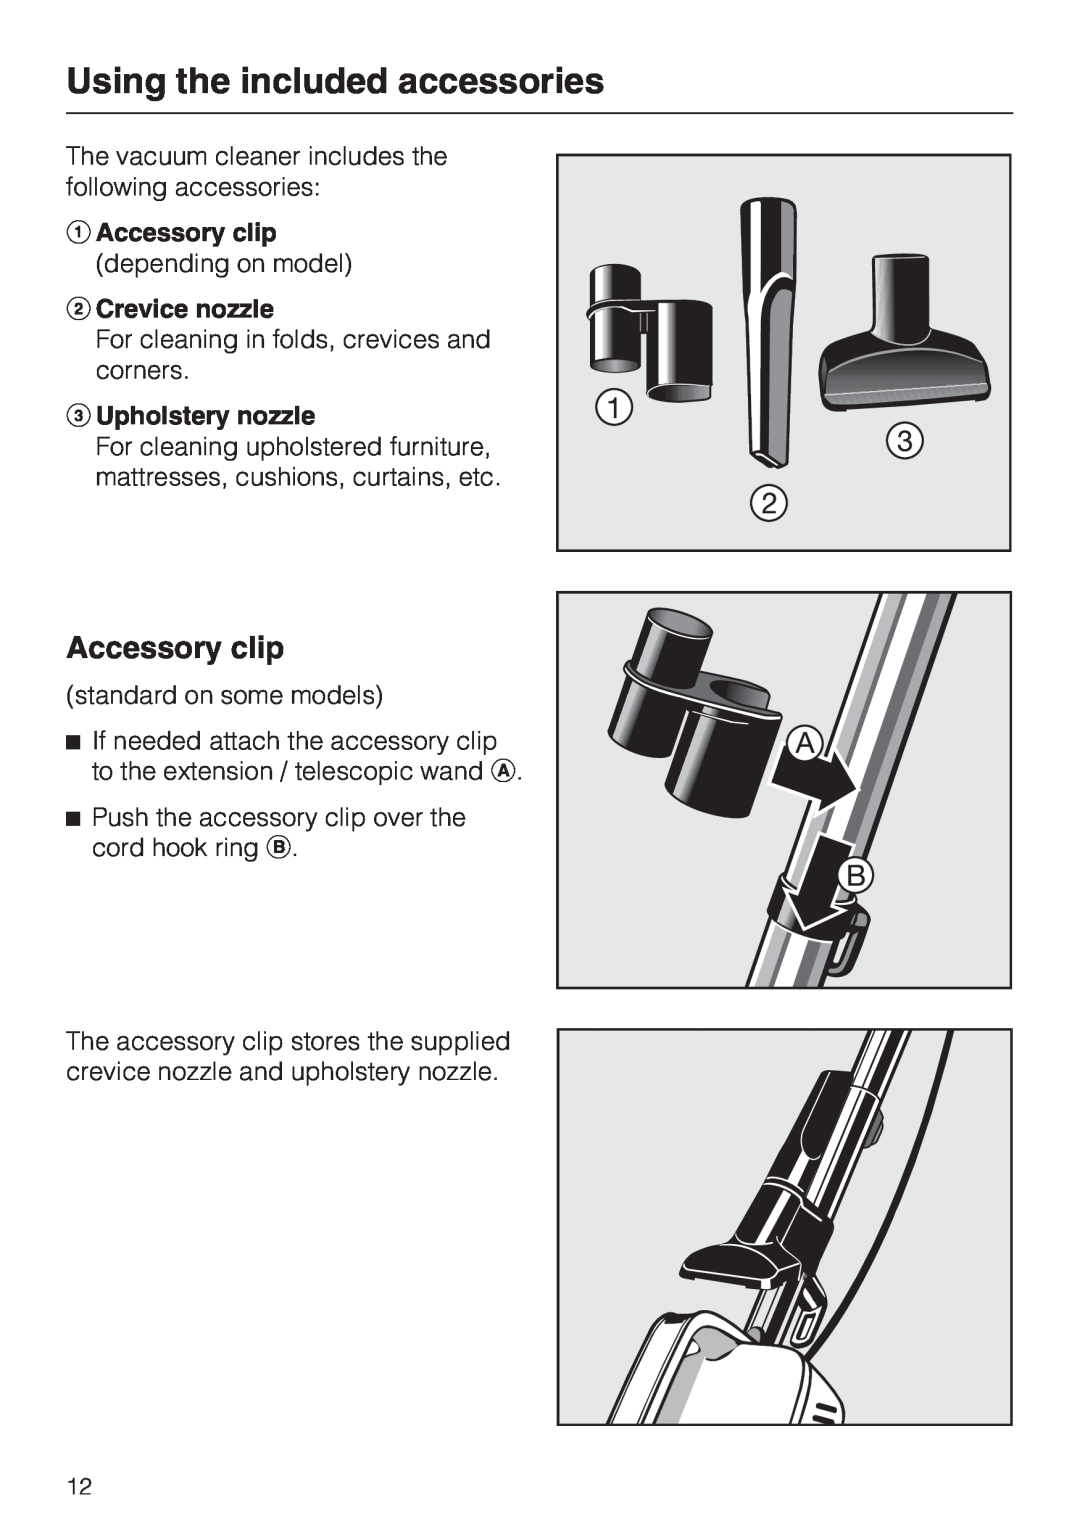 Miele S 190 operating instructions Using the included accessories, Accessory clip, Crevice nozzle, Upholstery nozzle 